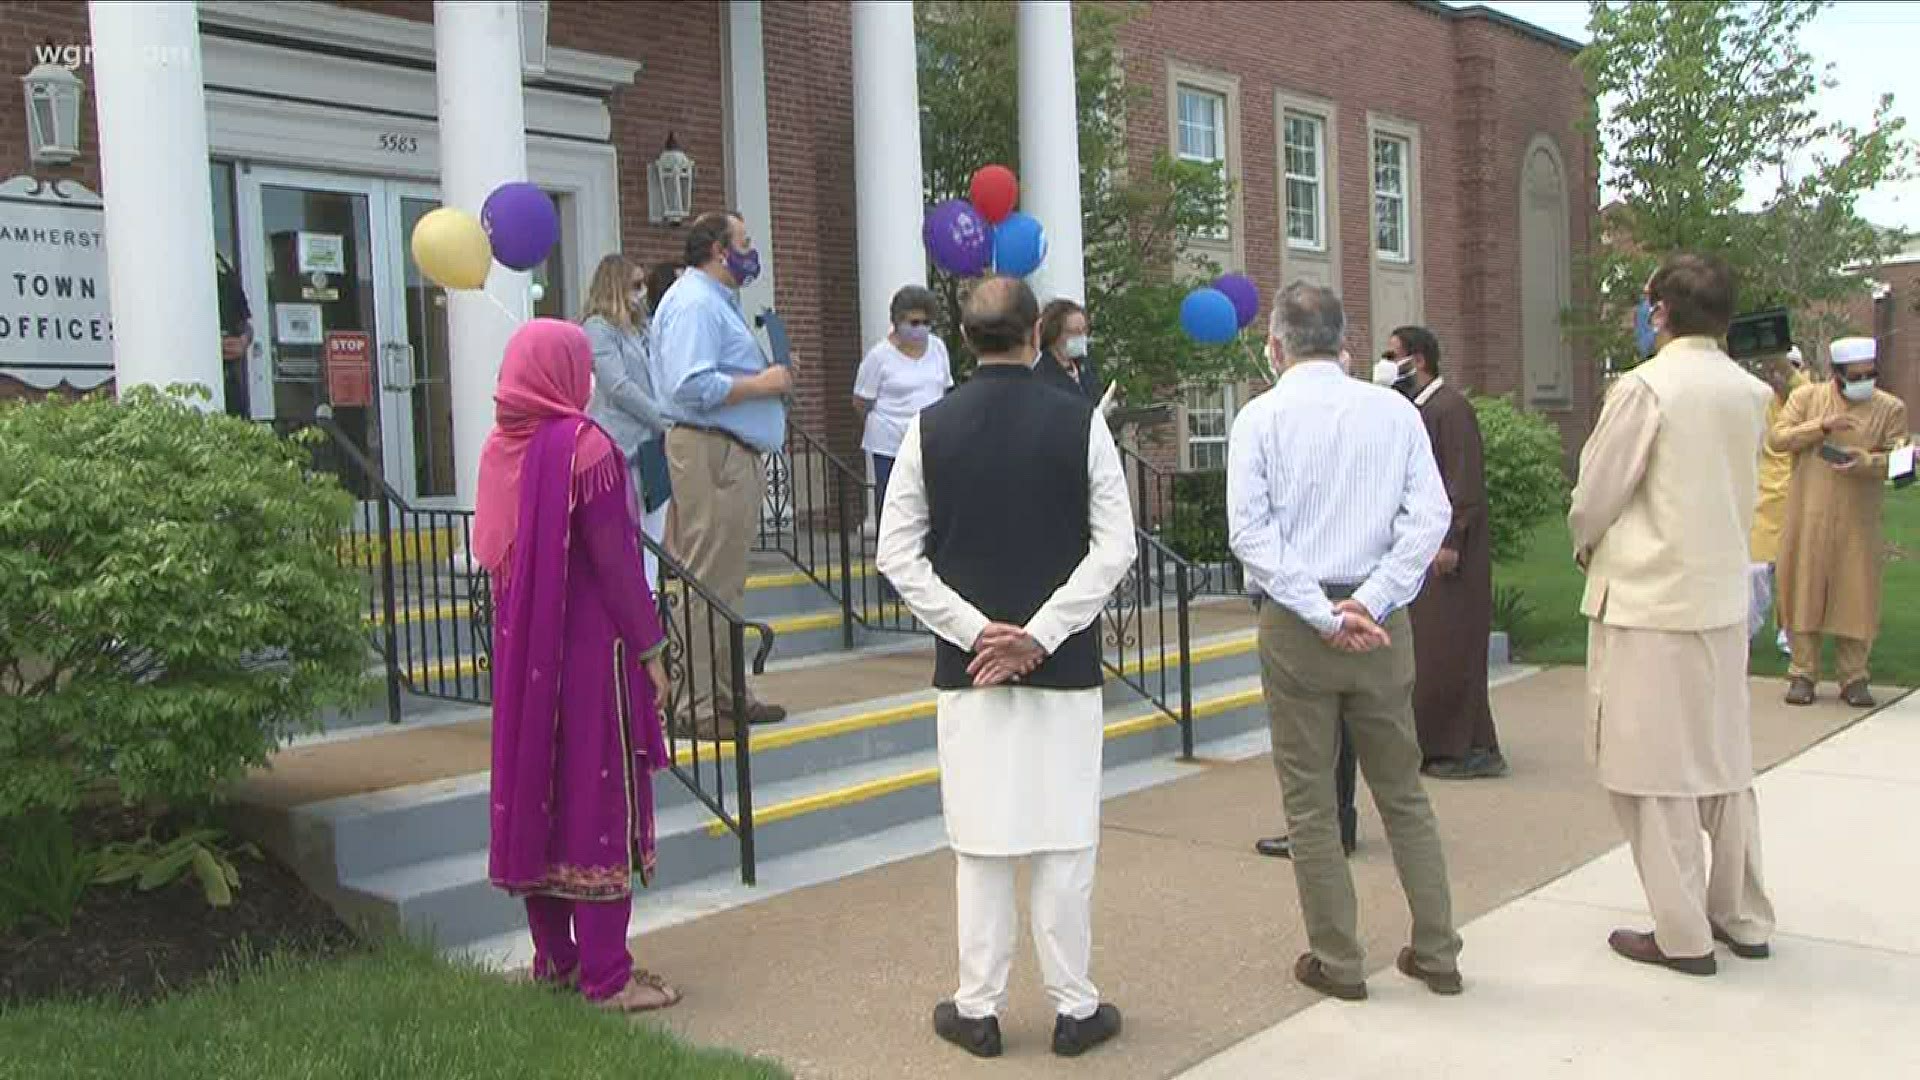 The parade went from UB to the Islamic Center in Amherst today. A socially distant way to celebrate the end of Ramadan and weeks of fasting in the Muslim community.